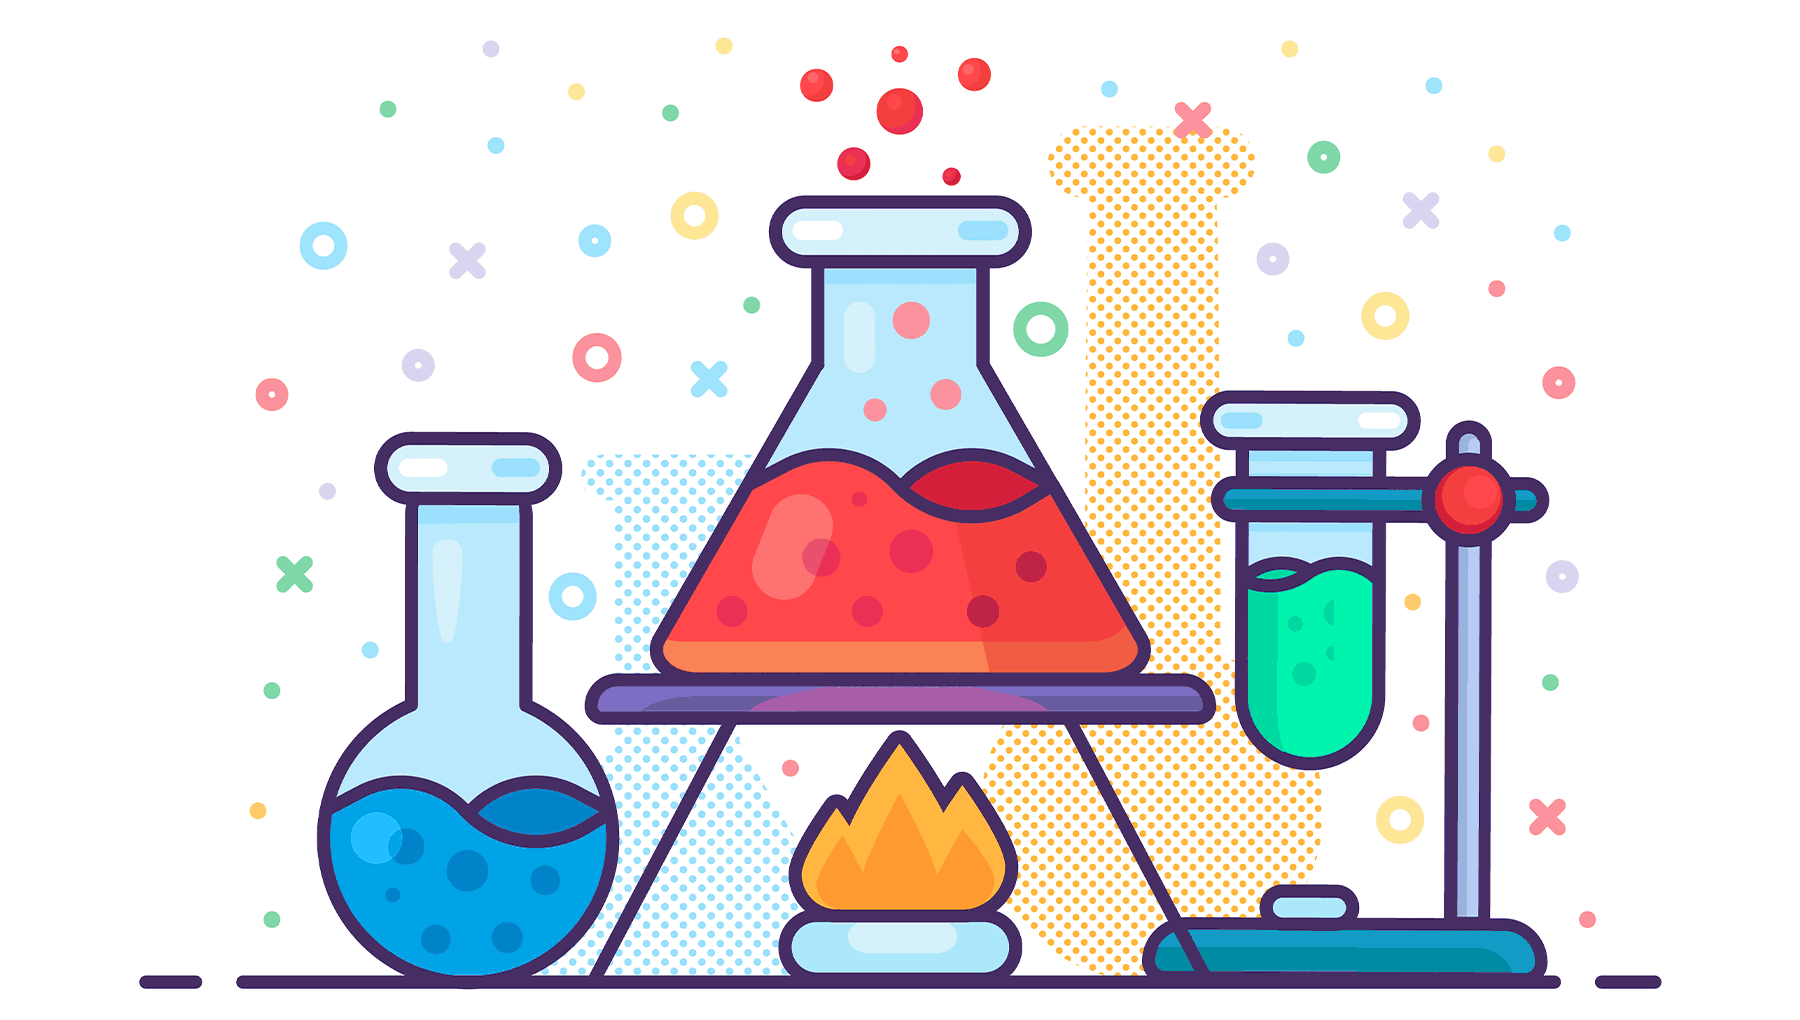 Amazon’s “Manage Your Experiments” what it is and how to use it